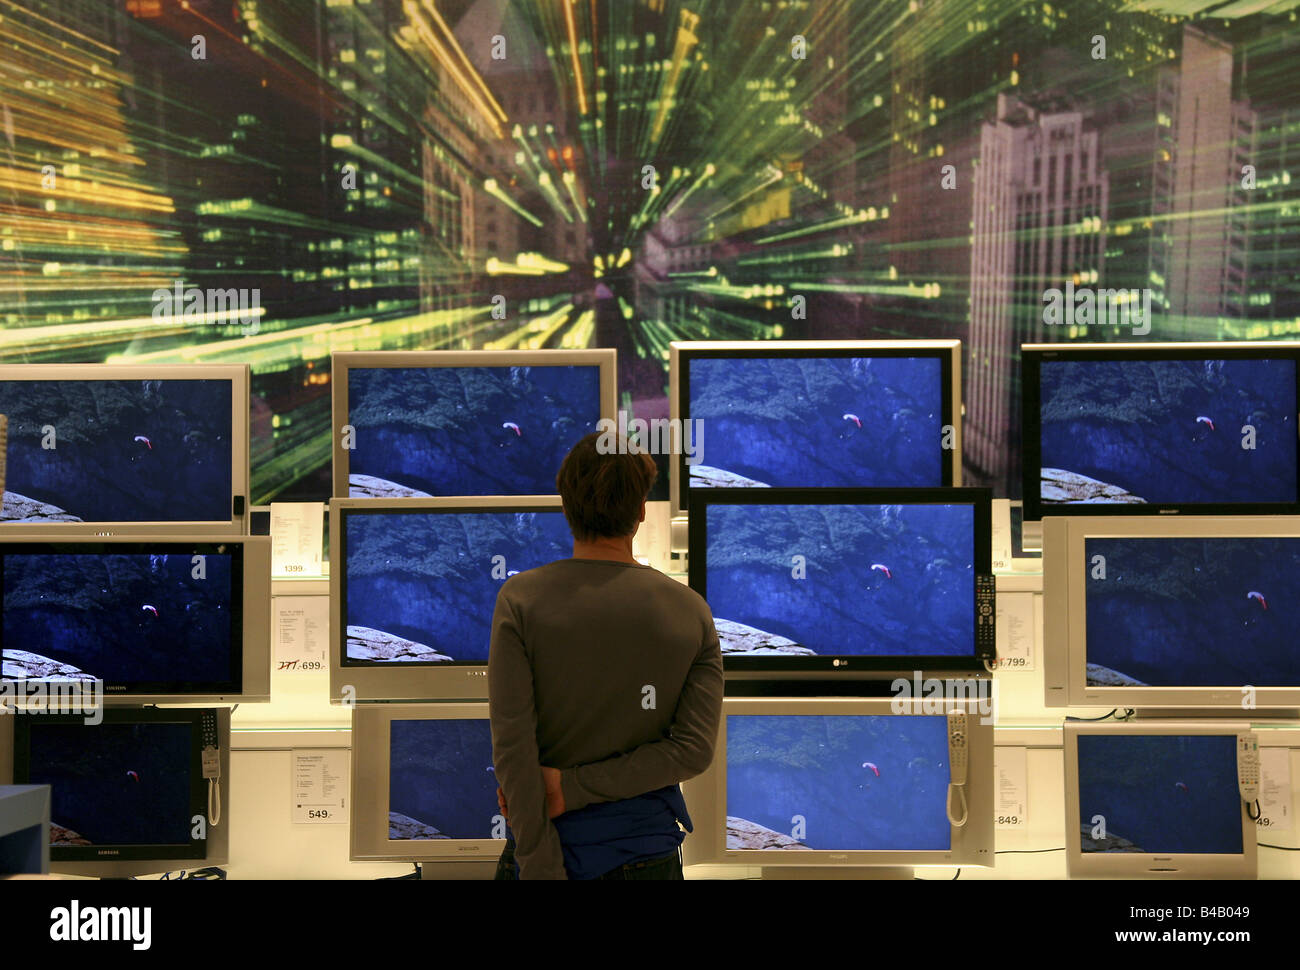 A man in front of television sets, Berlin, Germany Stock Photo